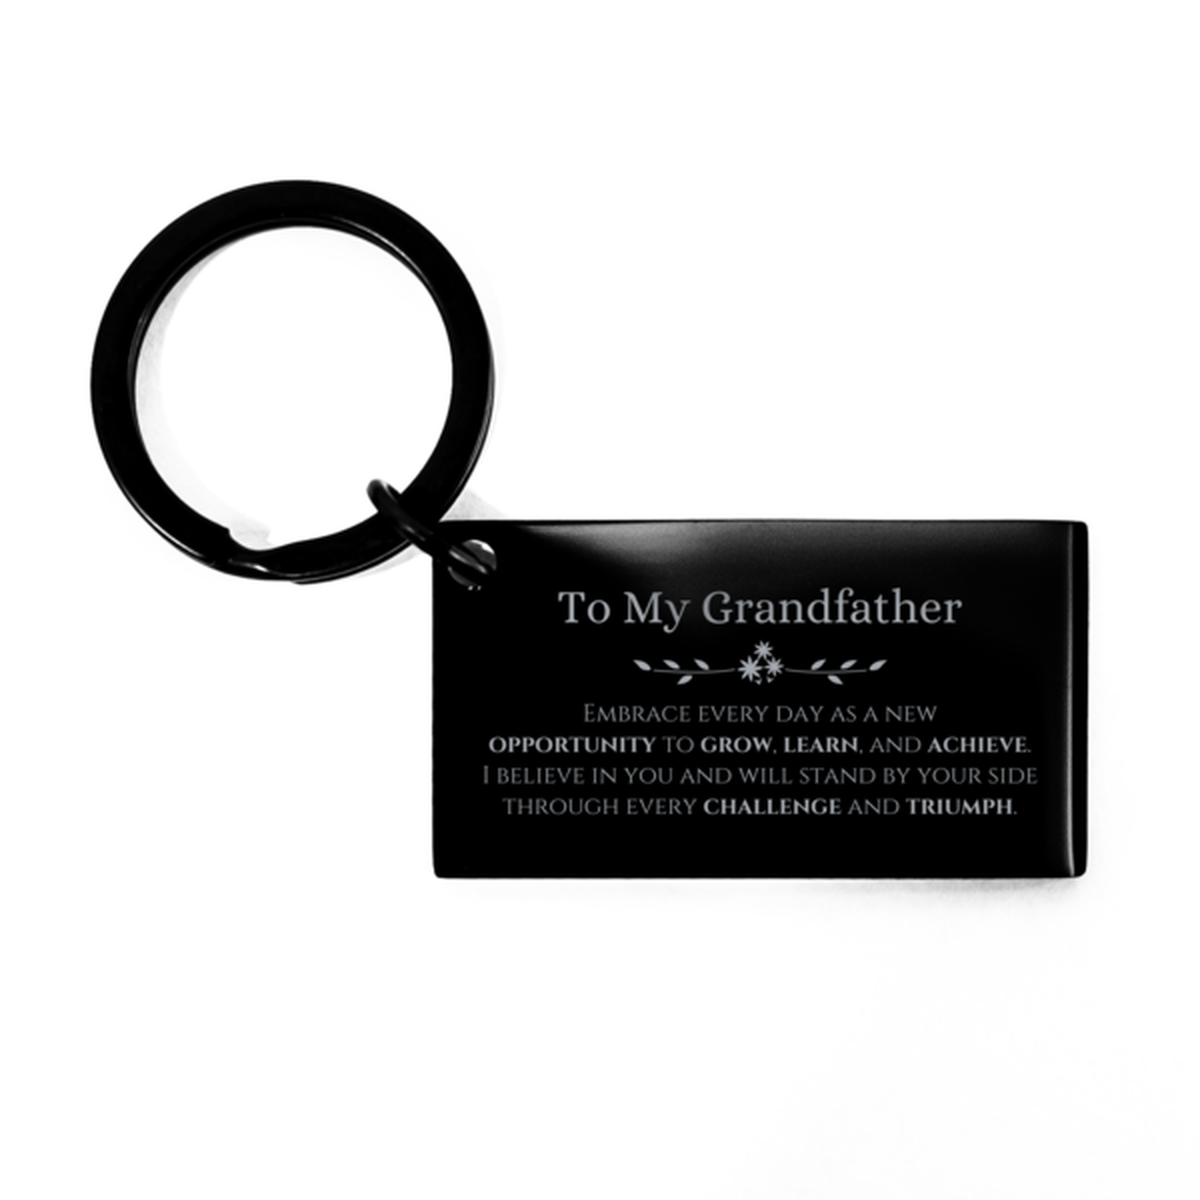 To My Grandfather Gifts, I believe in you and will stand by your side, Inspirational Keychain For Grandfather, Birthday Christmas Motivational Grandfather Gifts